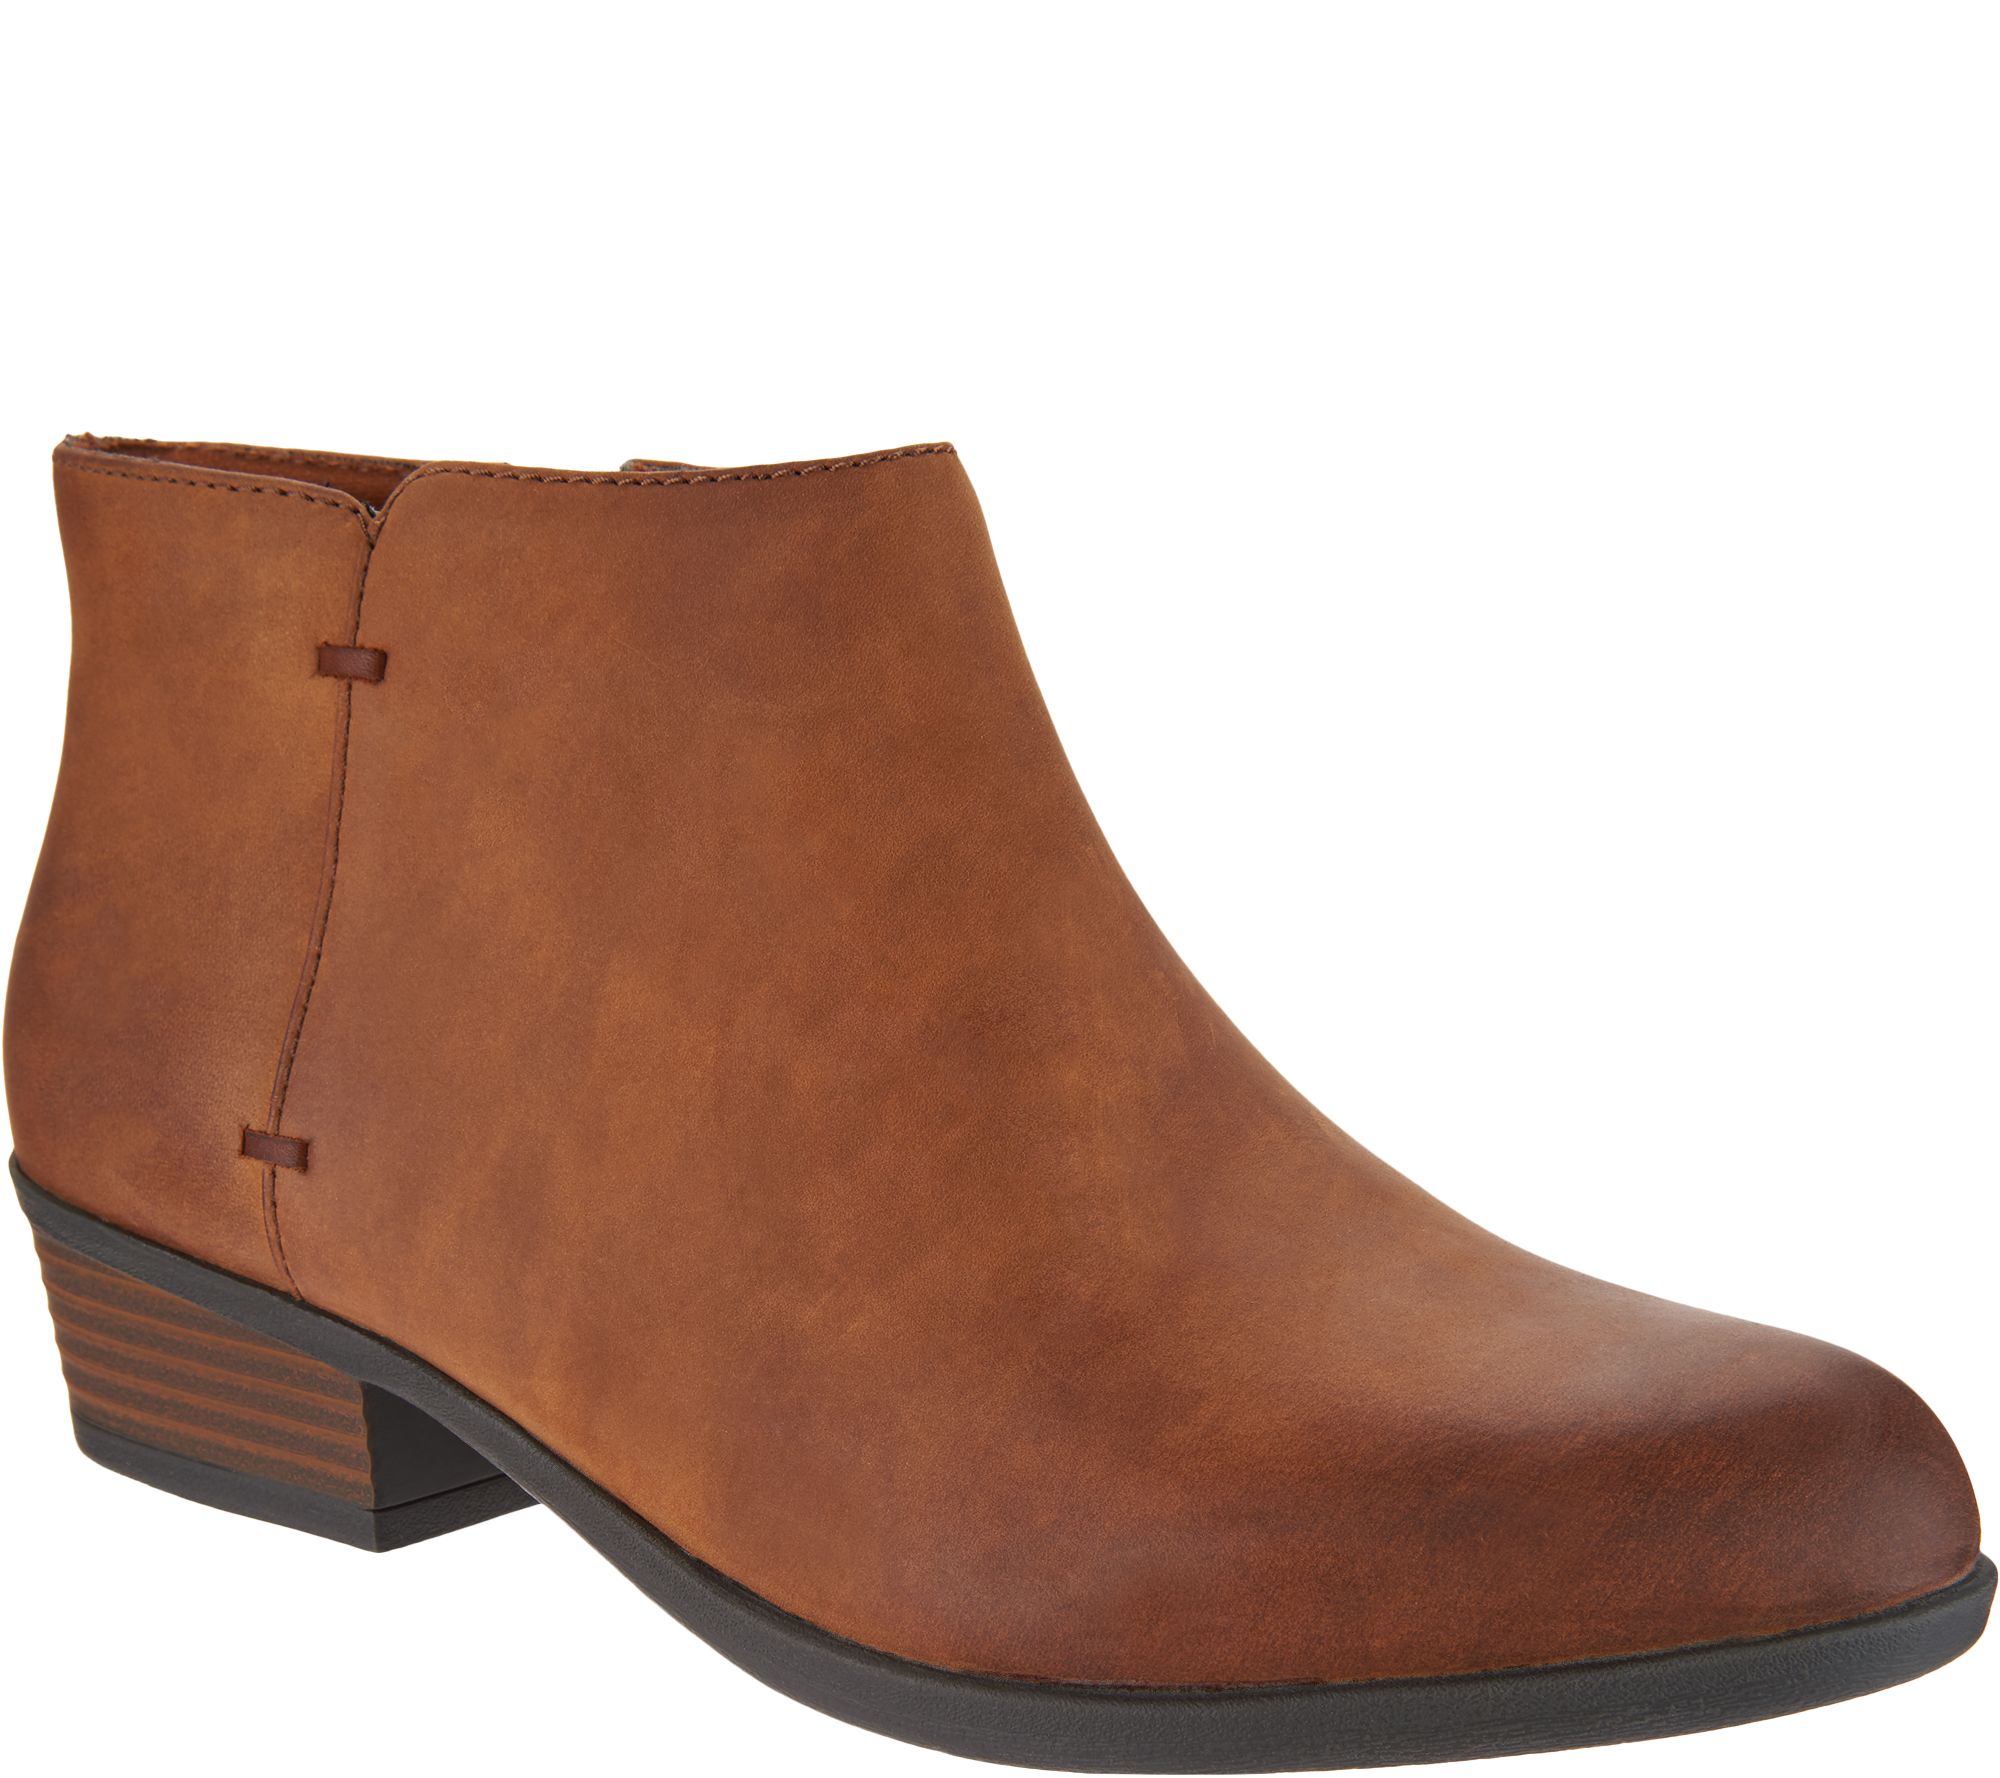 Clarks Collection Leather Ankle Boots - Addiy Zora QVC.com